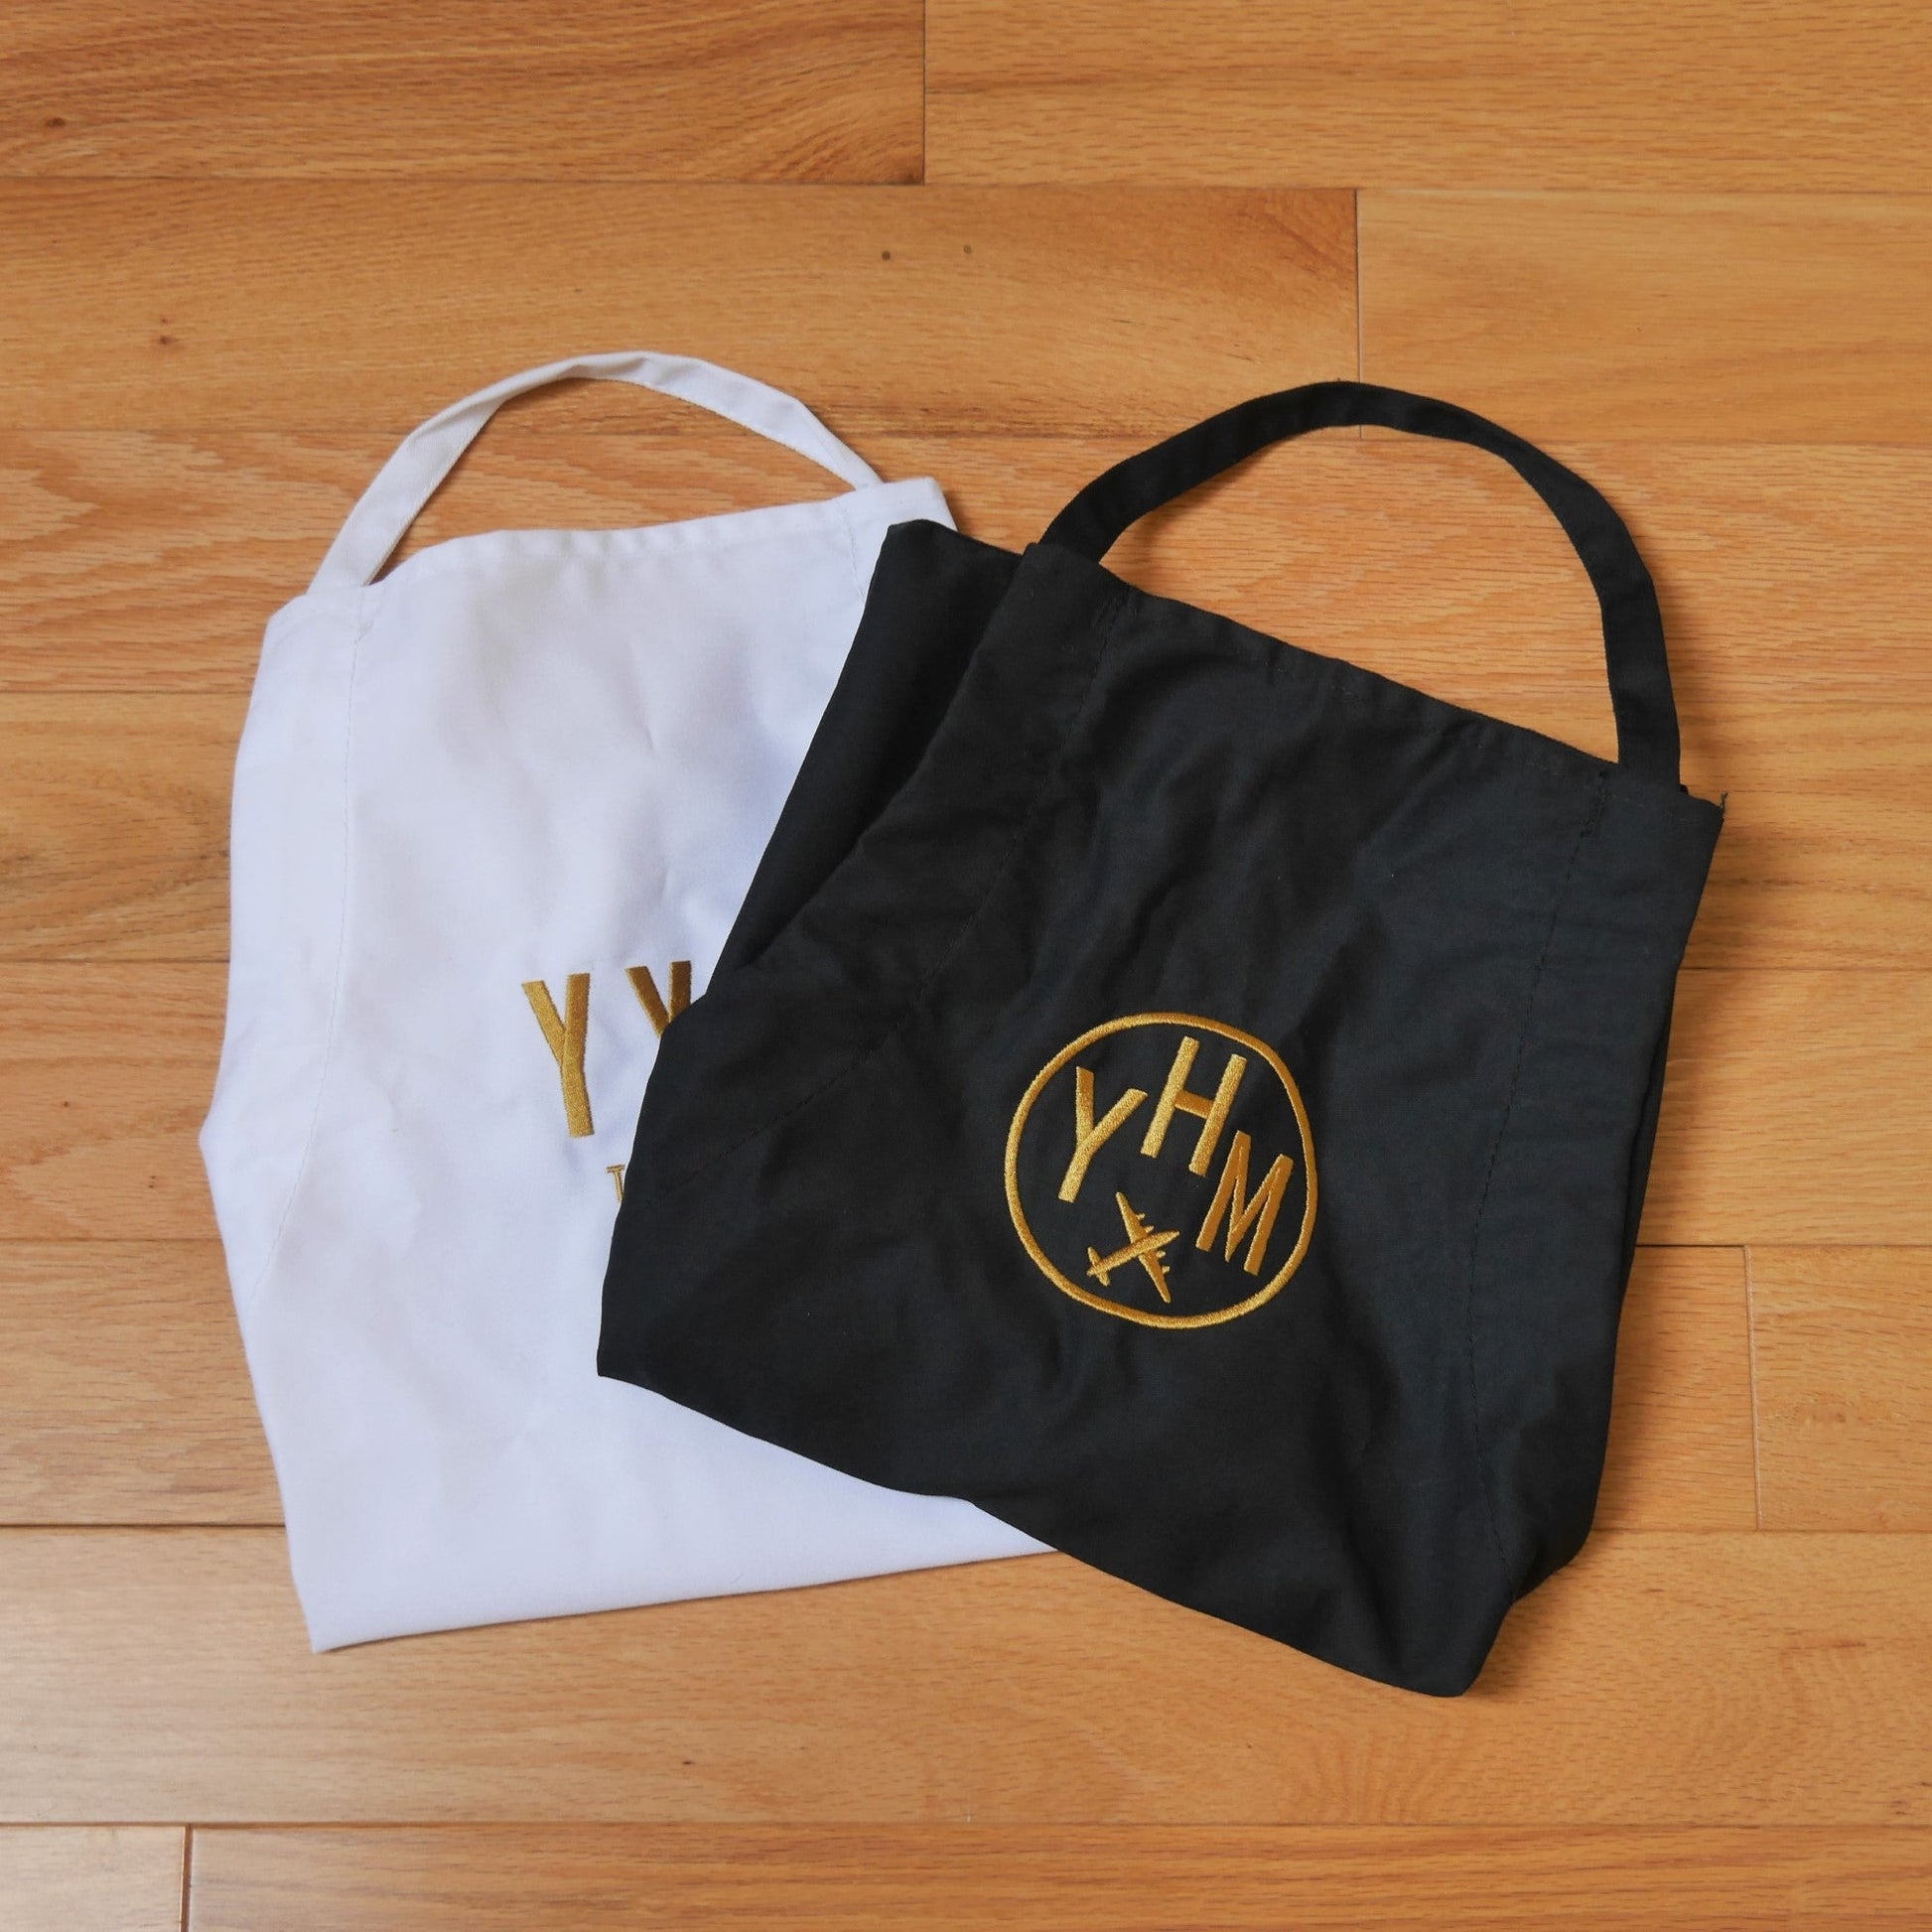 City Embroidered Apron - Old Gold • SAN San Diego • YHM Designs - Image 14